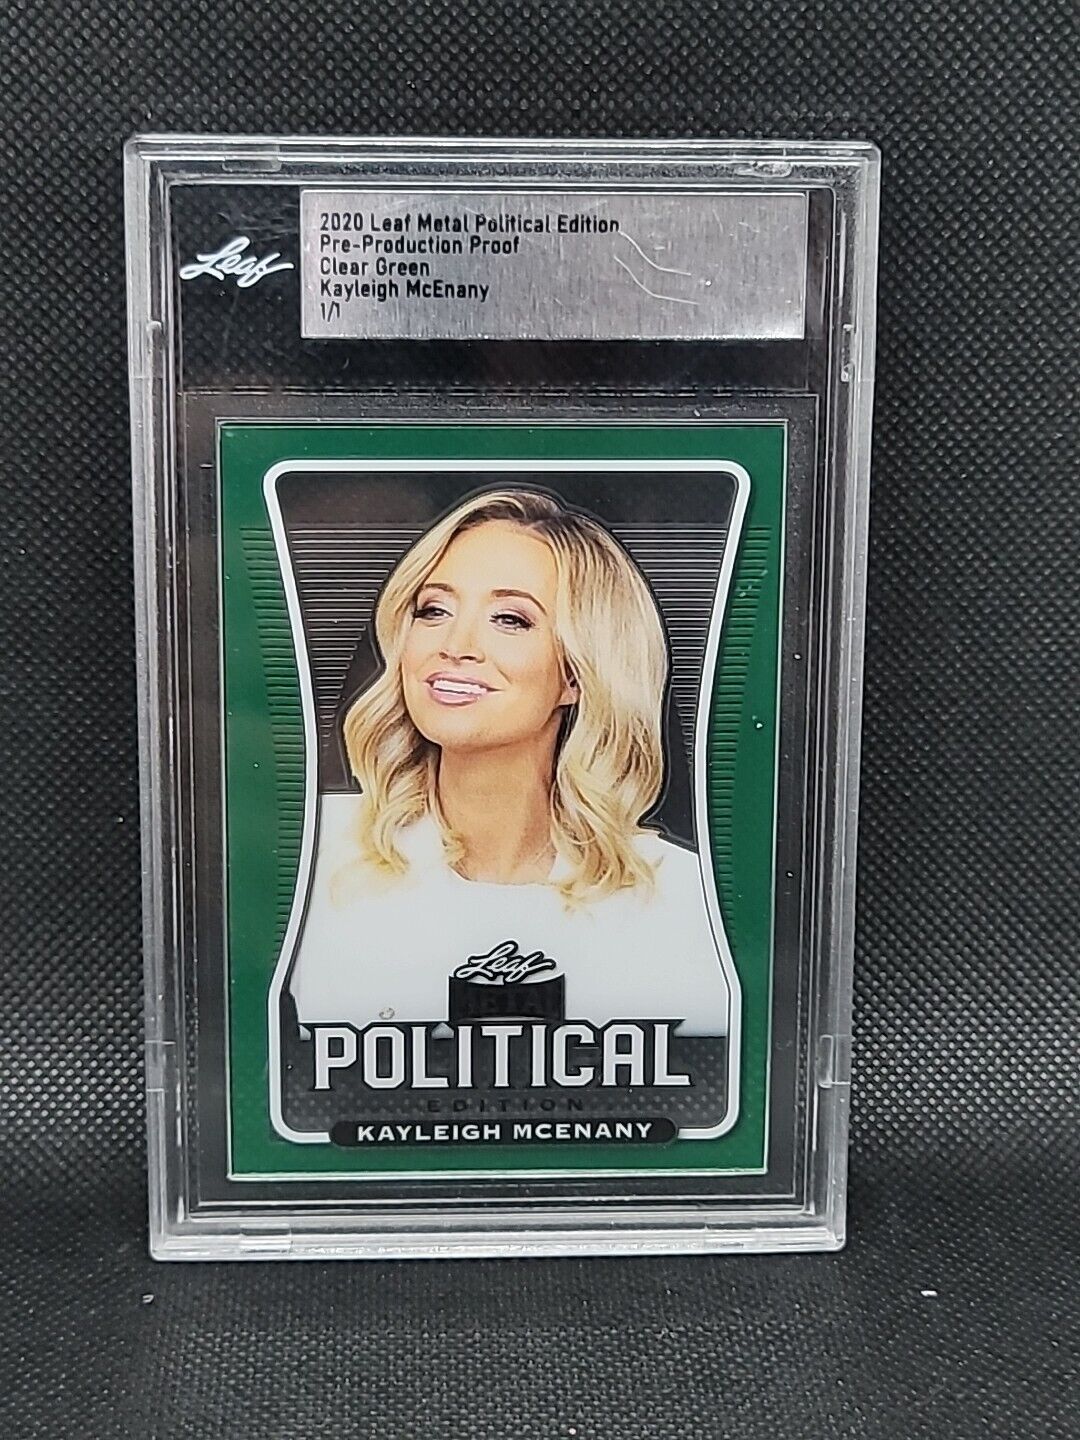 2020 Leaf Metal Political Clear Green Pre Production Proof Kayleigh McEnany 1/1